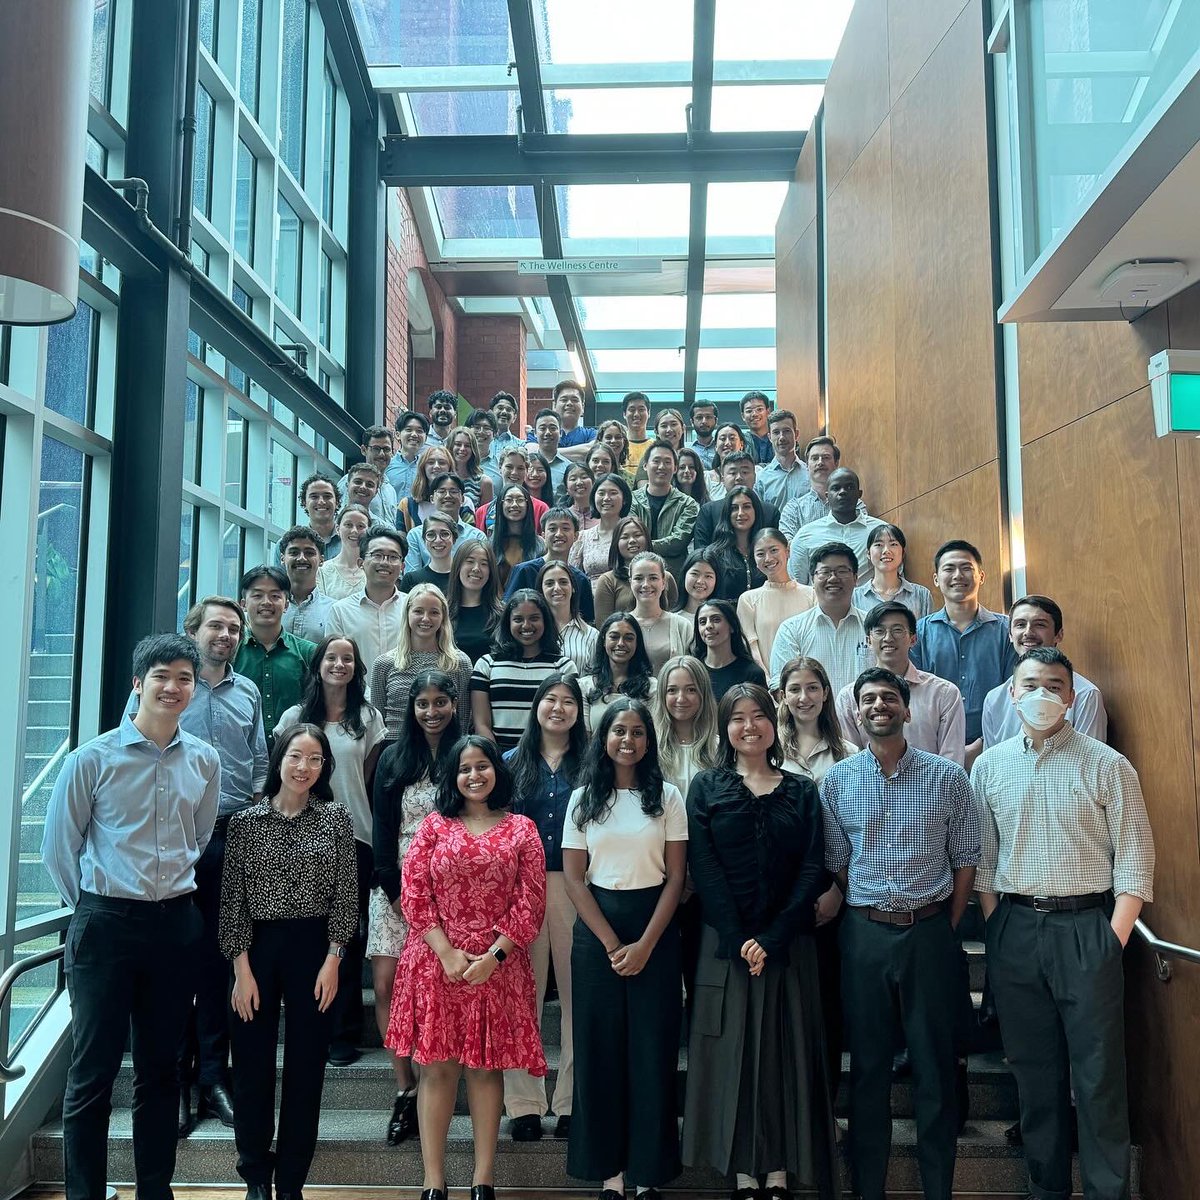 We’re thrilled to welcome 65 bright minds embarking on their medical journey as first-year doctors at Austin Health! This talented cohort are gearing up for their internship orientation, transitioning from medical students to junior doctors 👏